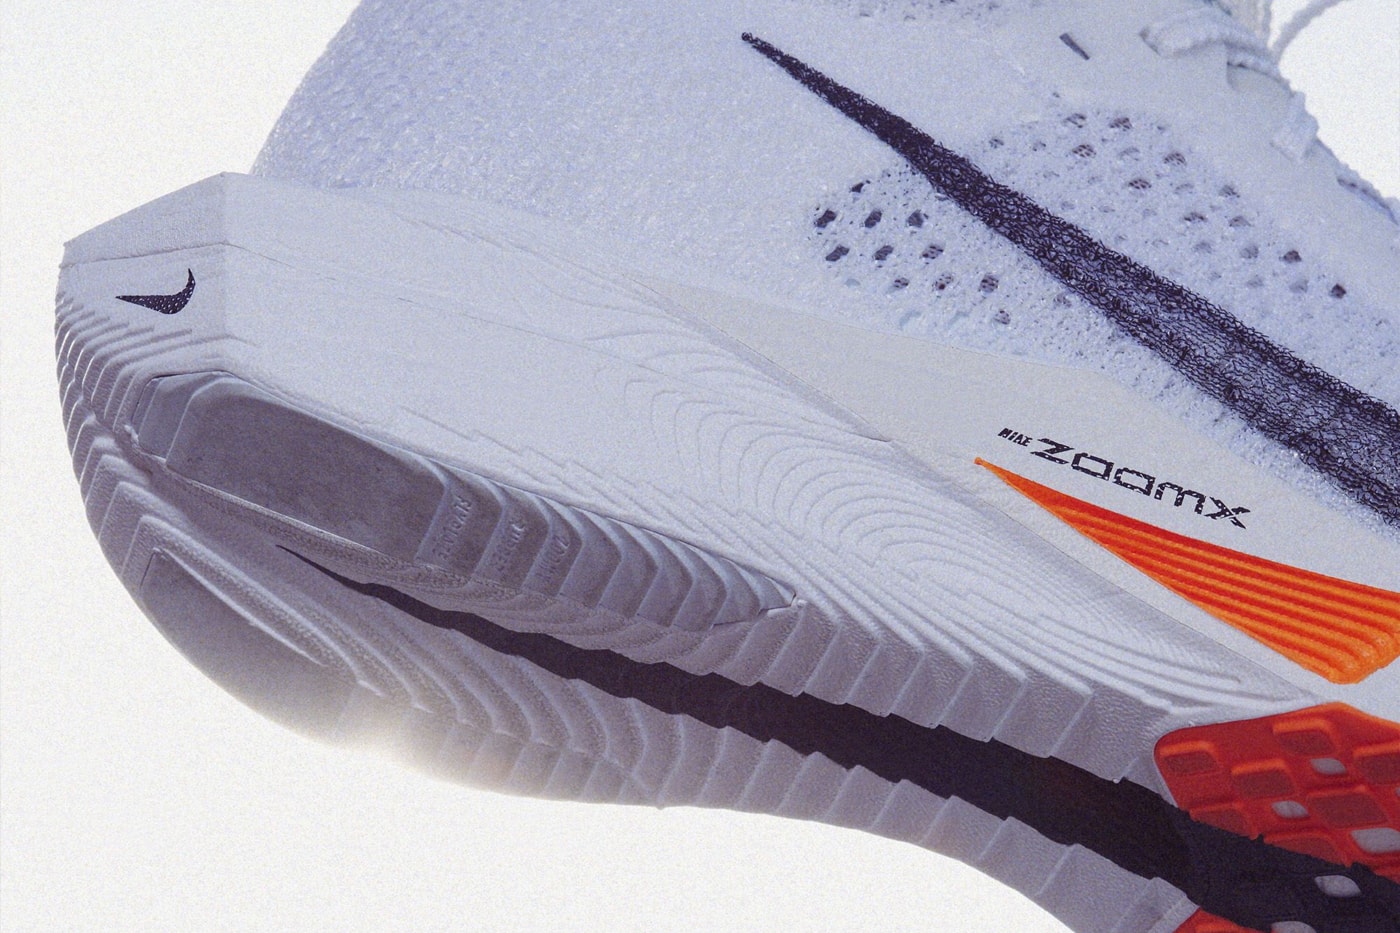 Nike Unveils New Speed-Focused Vaporfly 3 all round running racing shoe flyknit zoomx yarn upper lightweight running prototype colorway